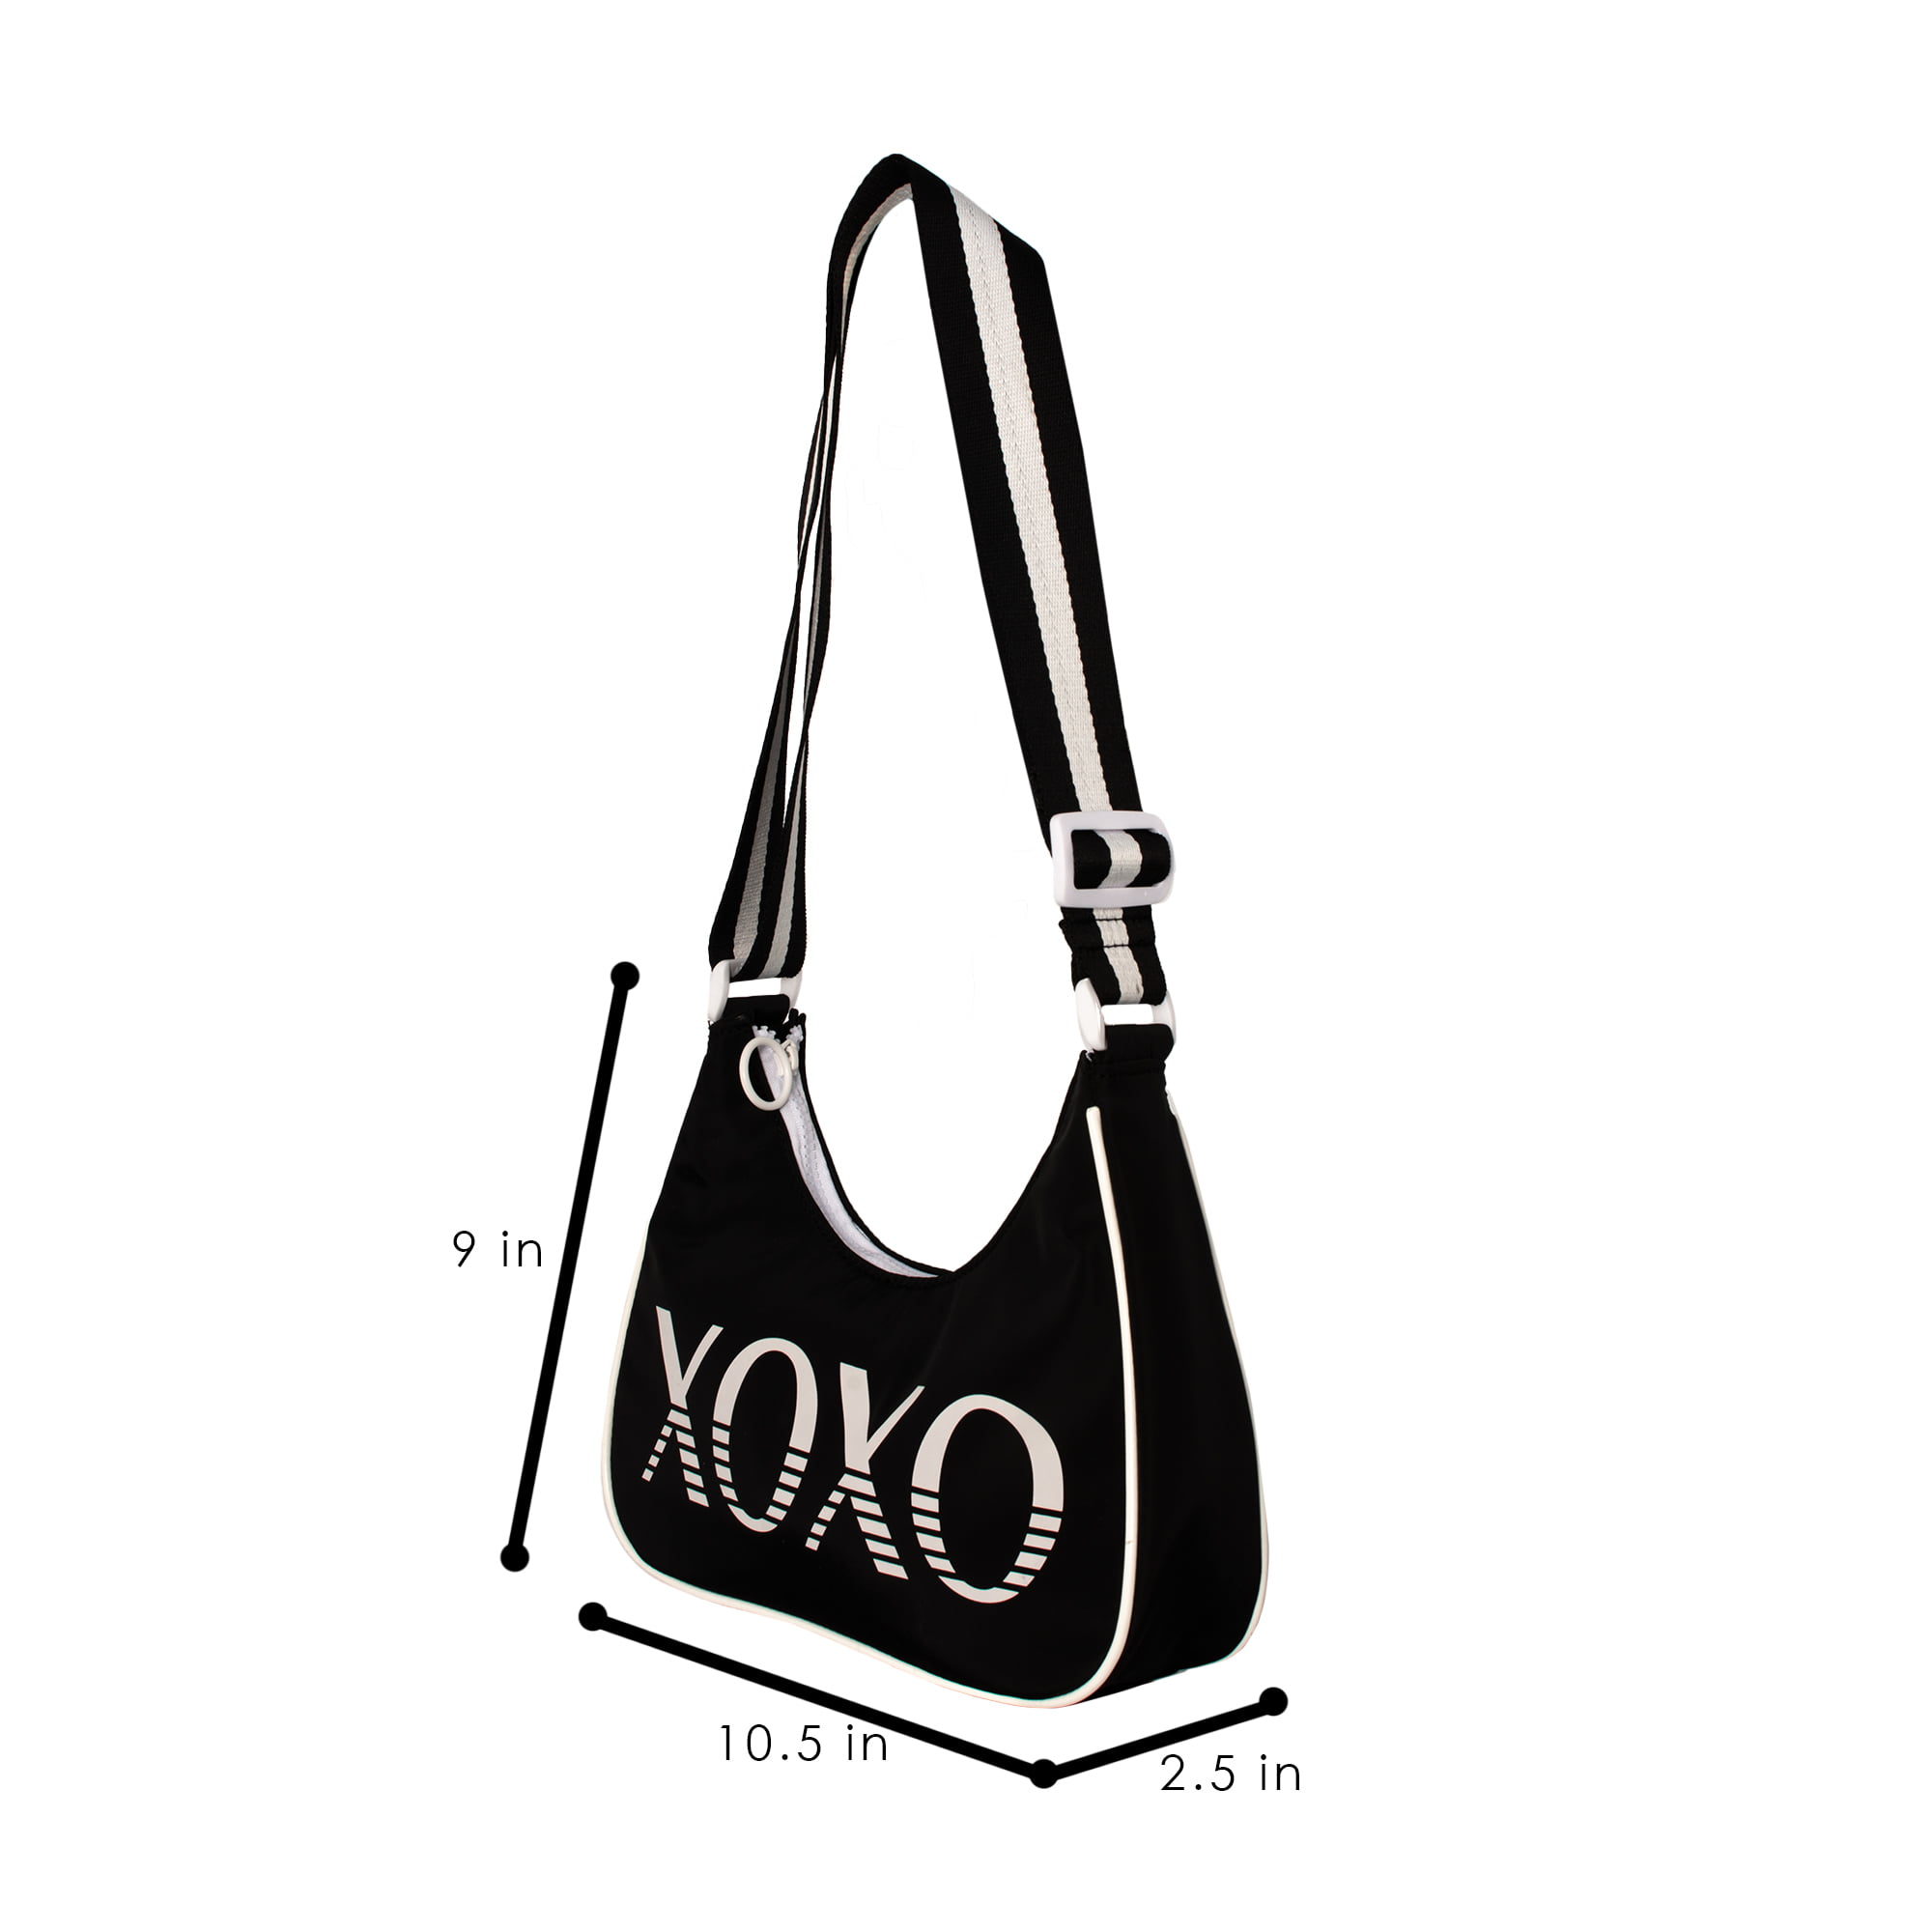 XOXO Canvas Tote Bag. - Open inside pocket - Zipper closure - Rope handles  - Approximately 22